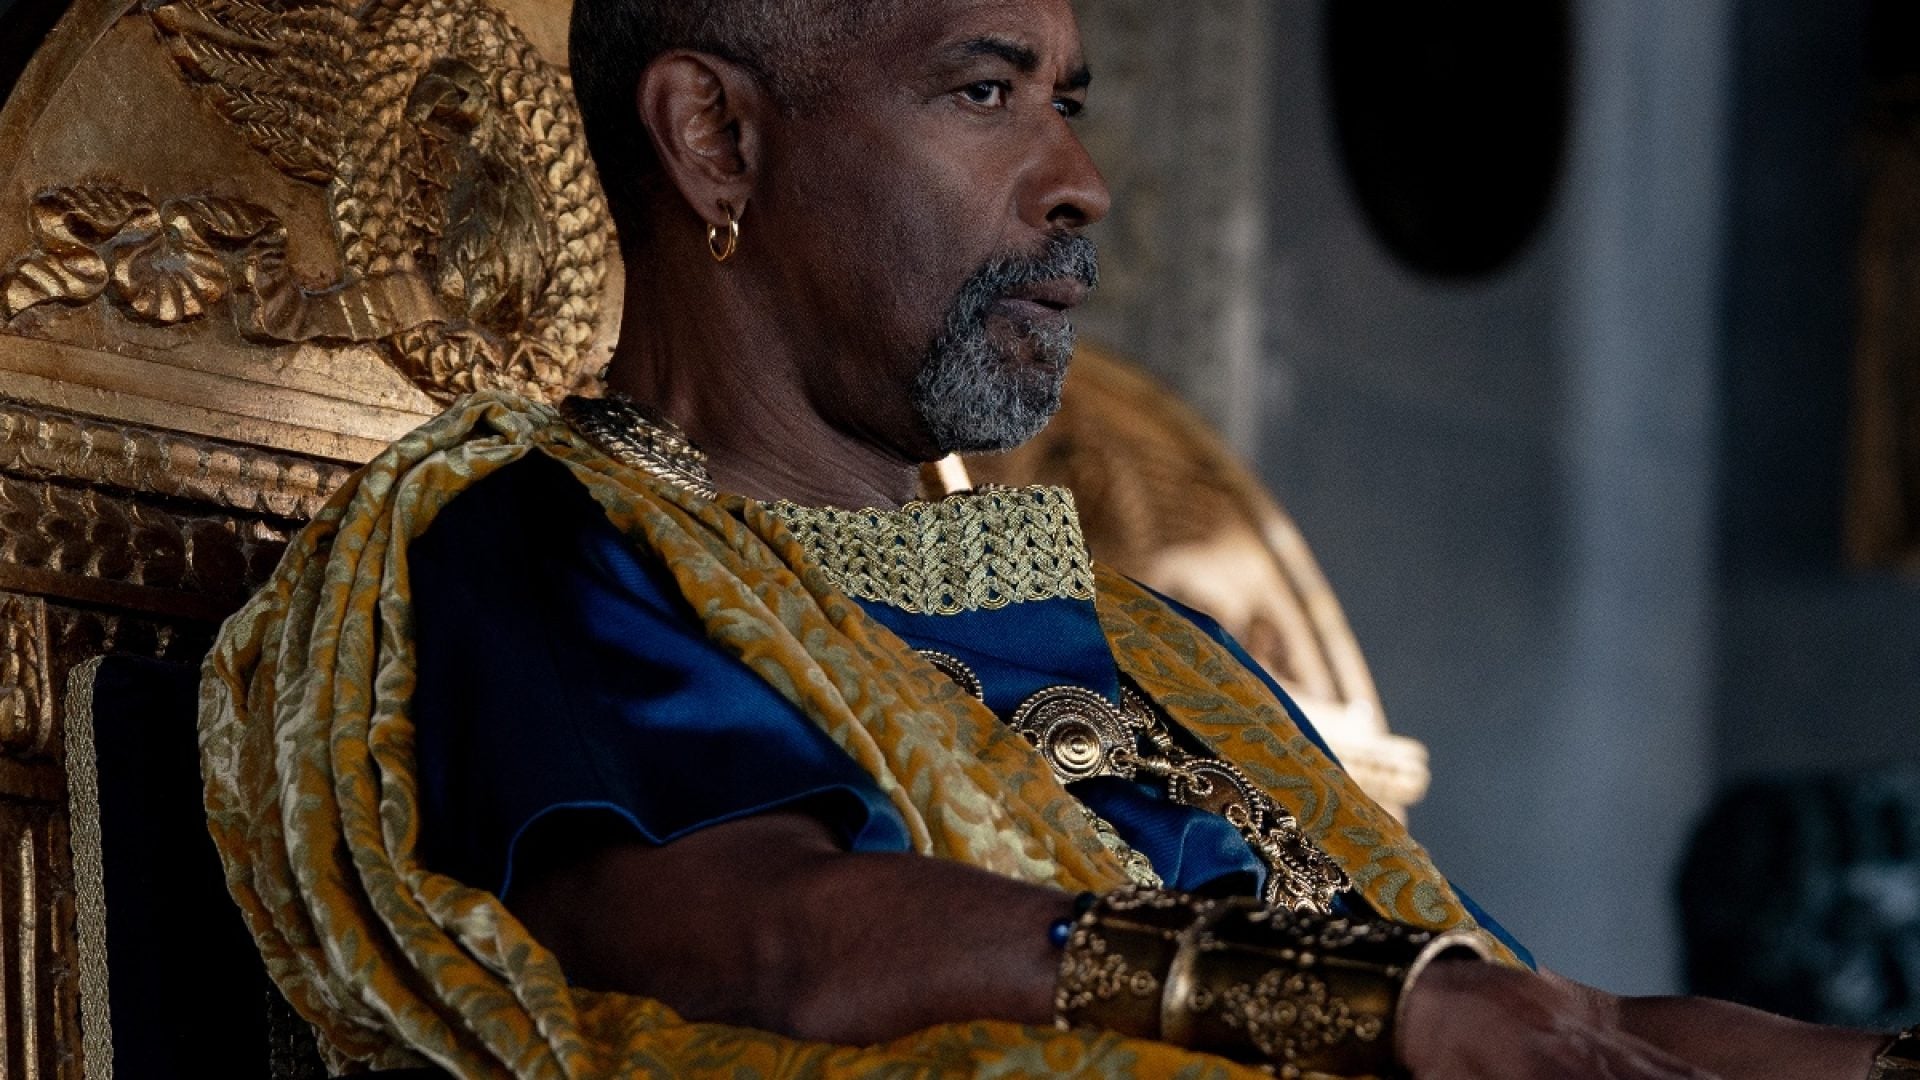 WATCH: Denzel Washington Stars In The Exciting New Trailer For ‘Gladiator II’